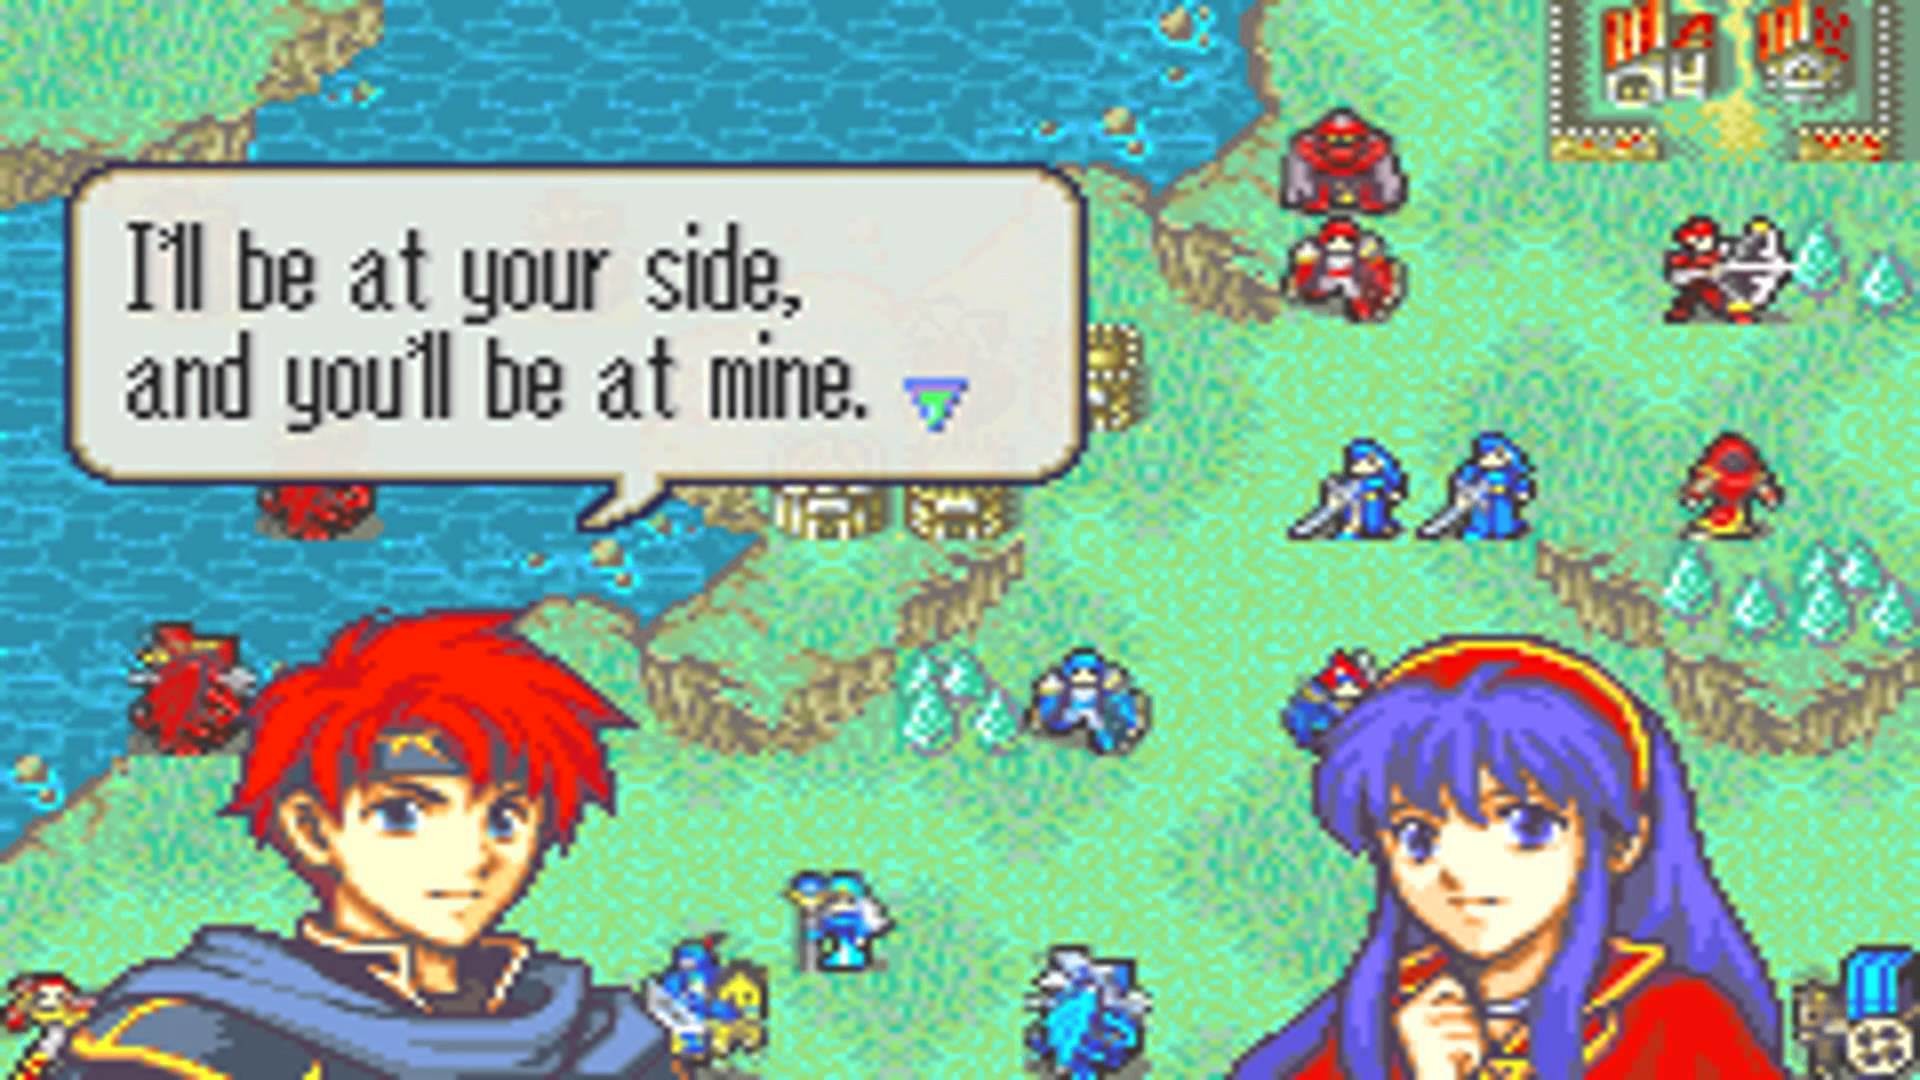 1920x1080 Fire Emblem The Sword of Seals: Roy and Lilina Support Conversations -  YouTube